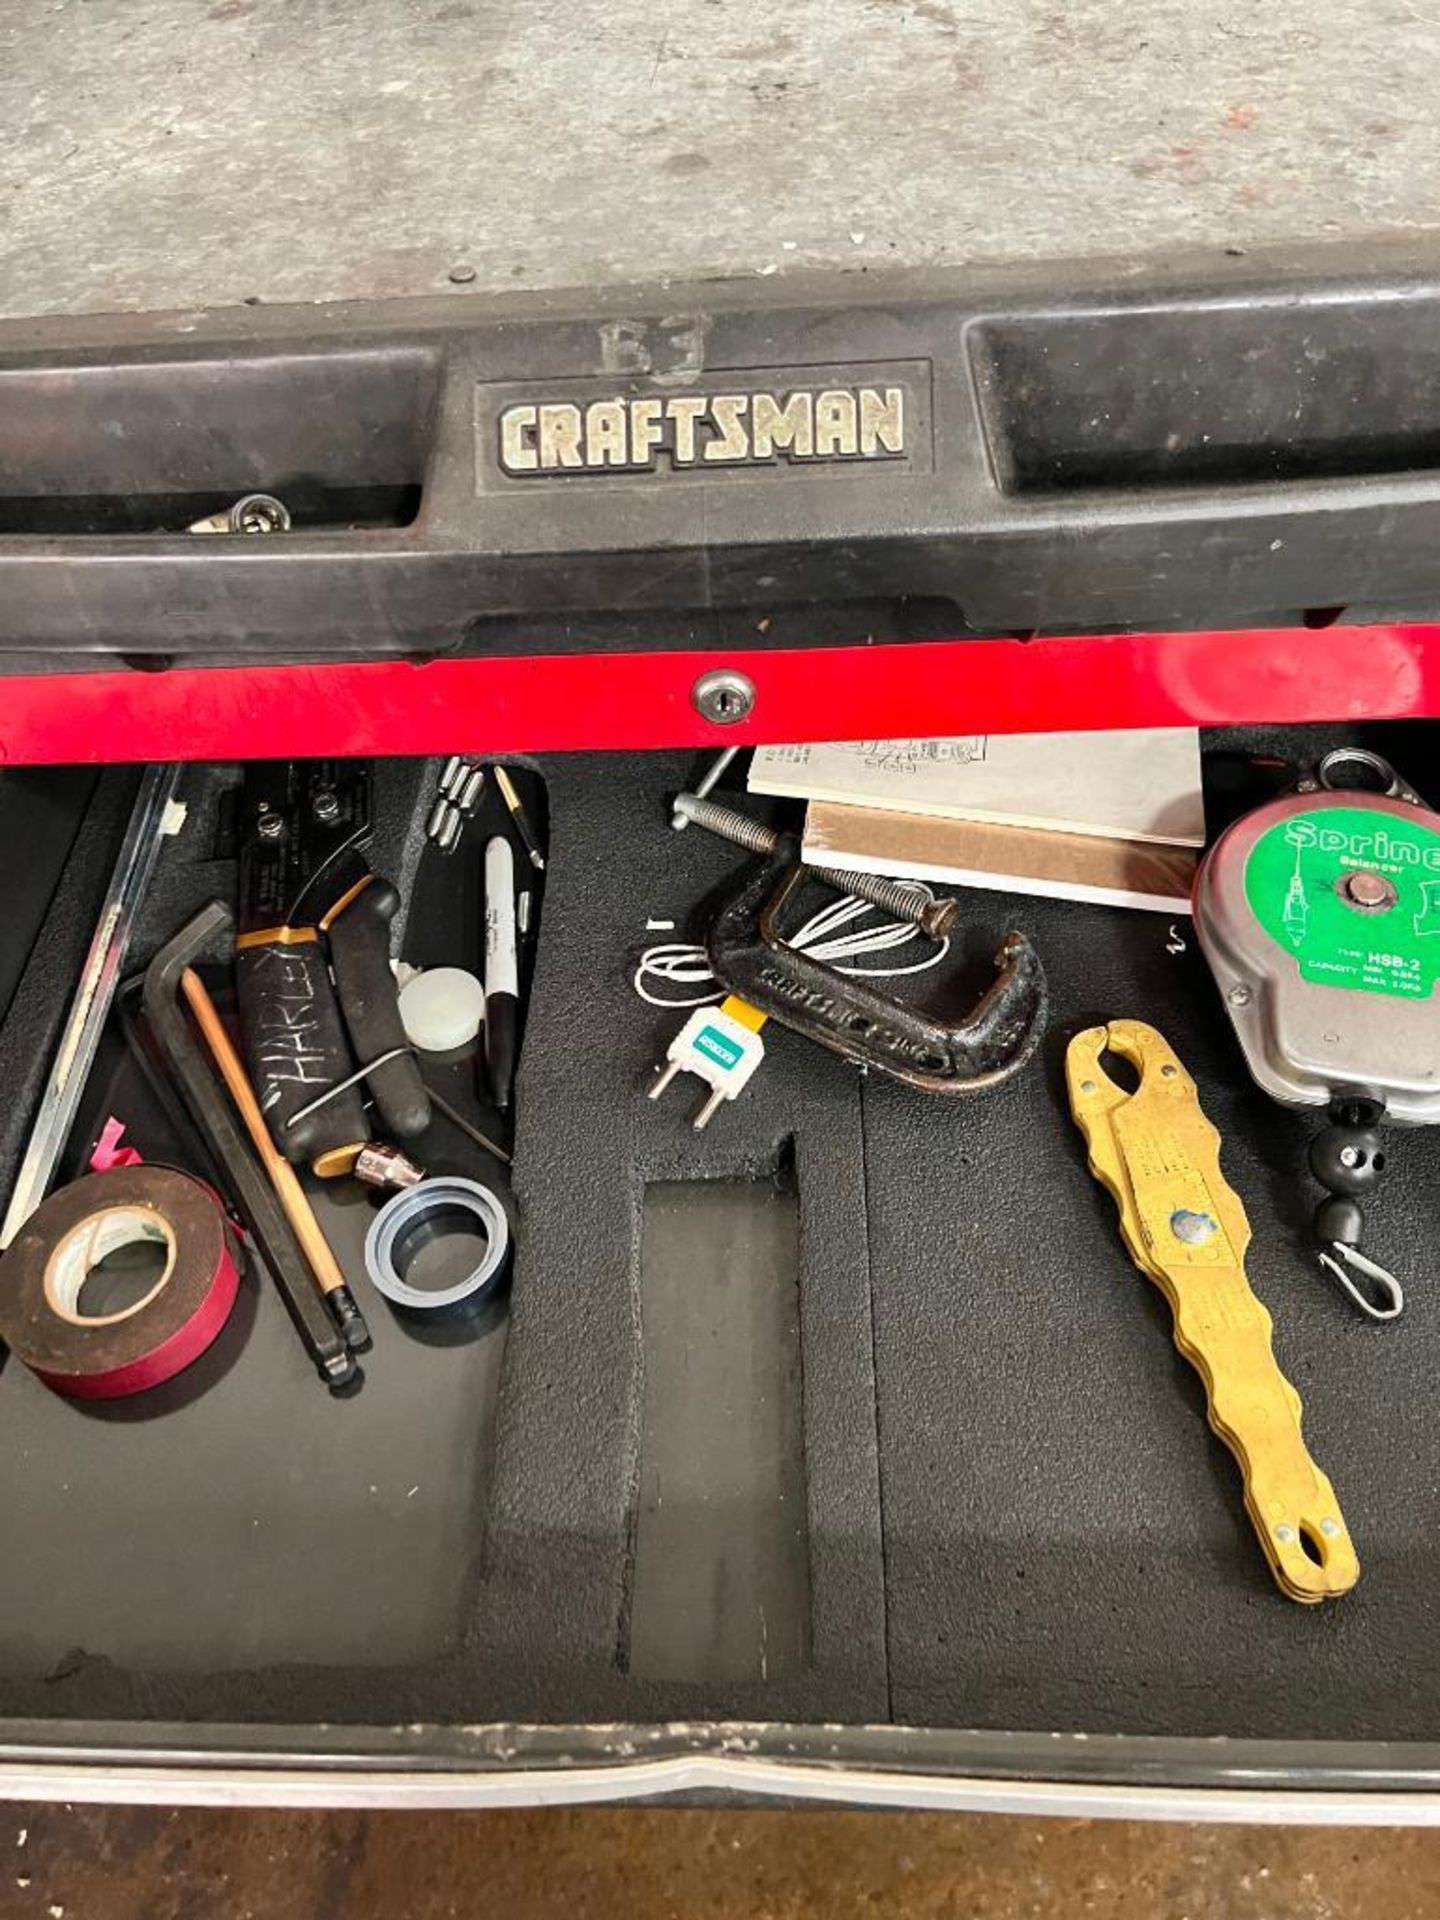 Craftsman 5-Drawer Rolling Toolbox w/ Content of Assorted Tools - Image 2 of 6